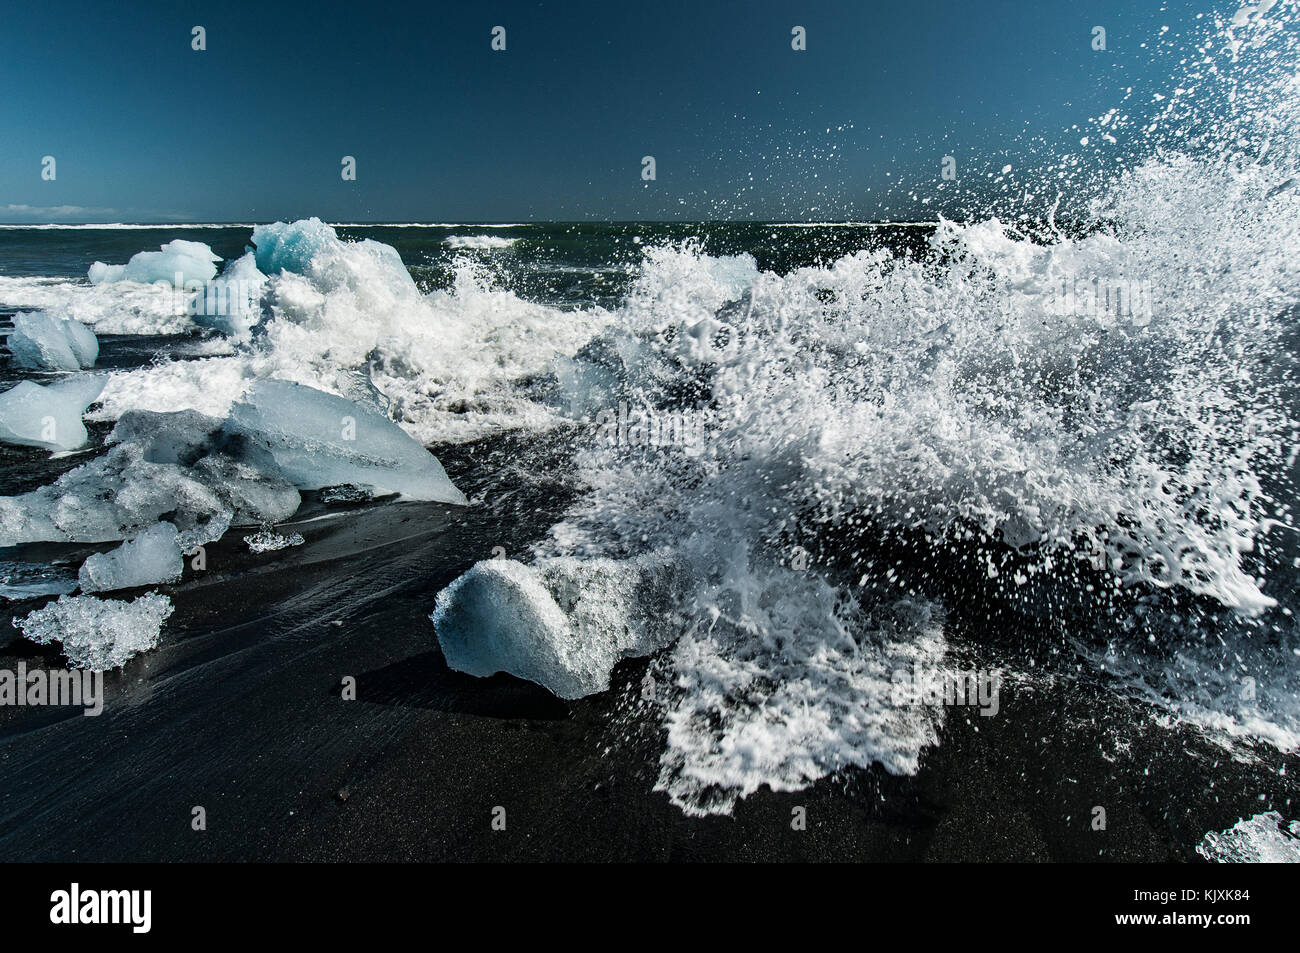 The waves of the ocean play with the Ice blocks rejected on the black volcanic beach near the Jökulsárlón in Iceland Stock Photo